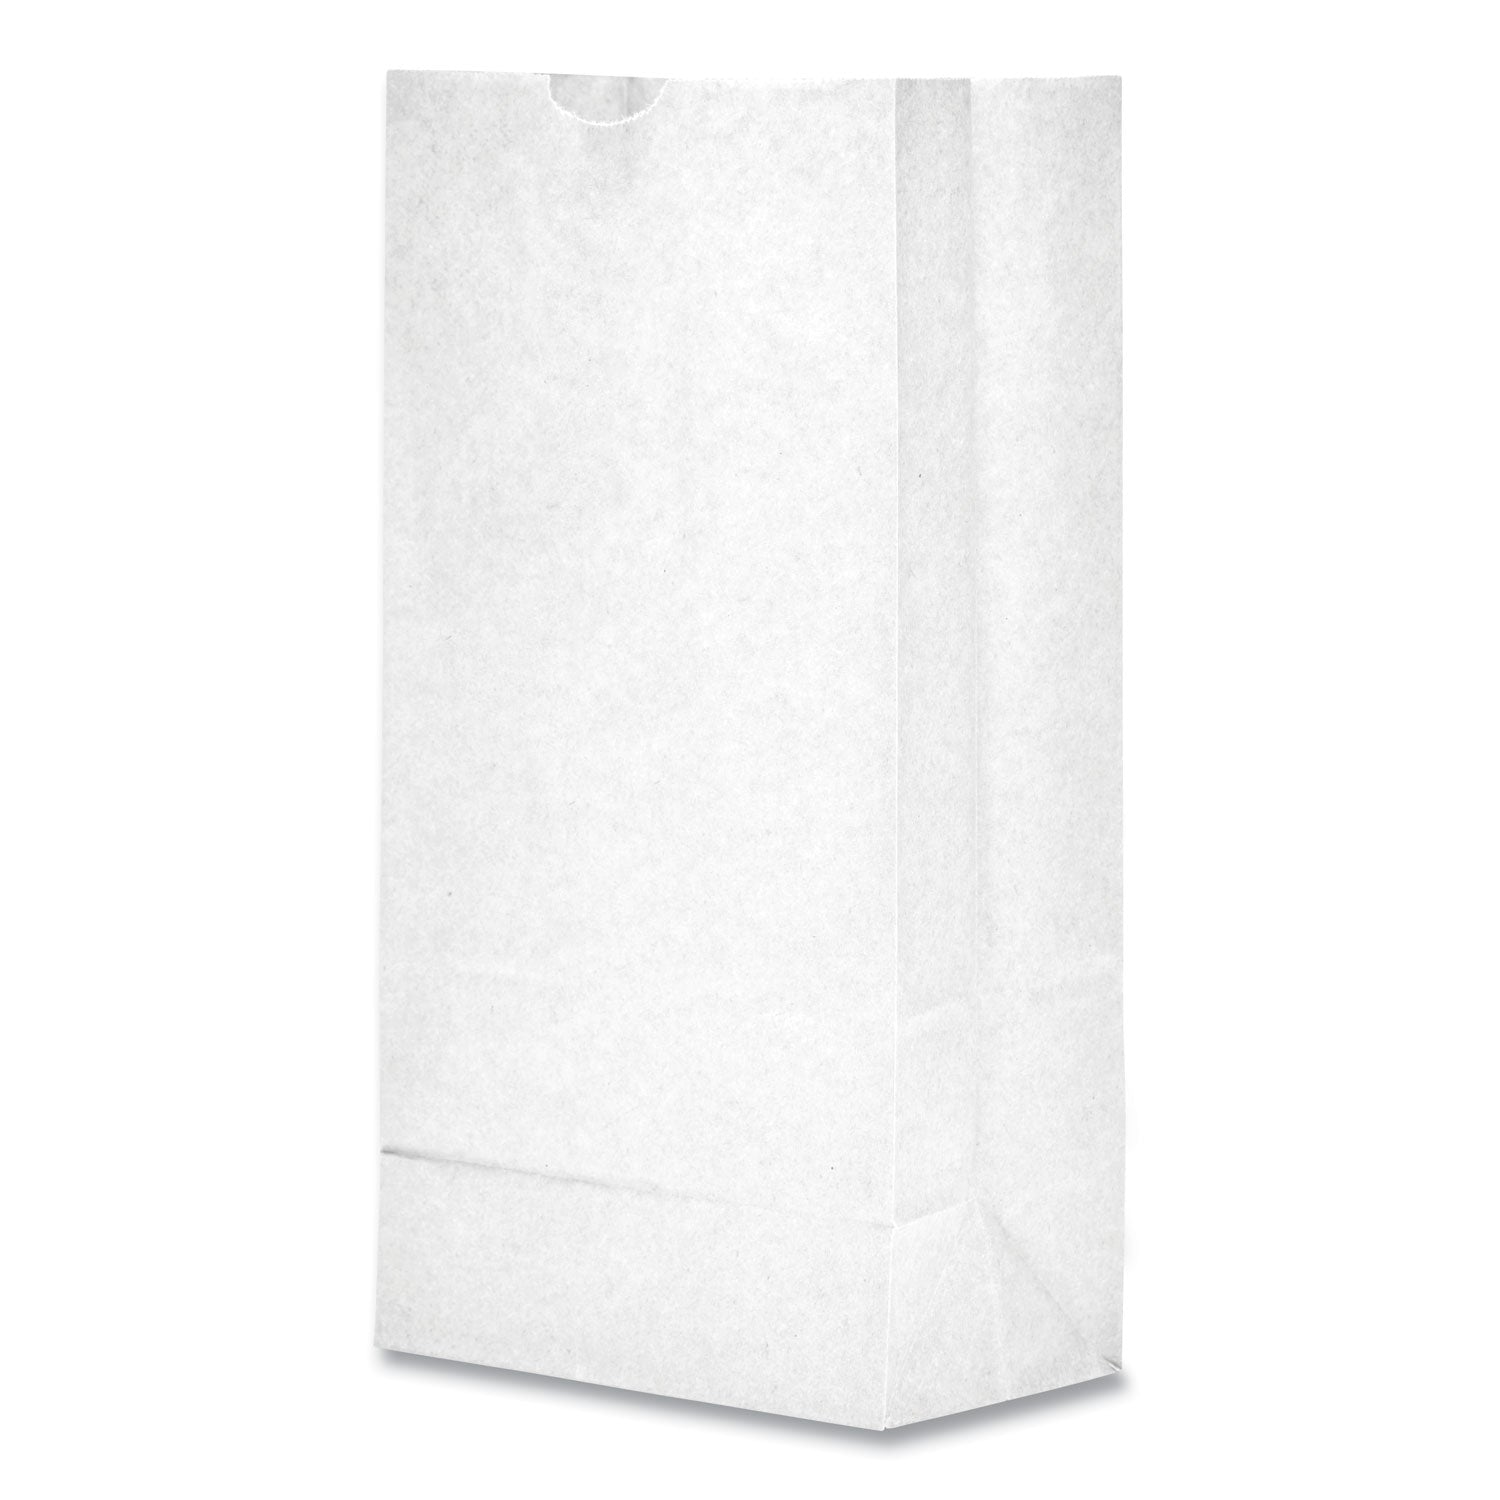 grocery-paper-bags-35-lb-capacity-#6-6-x-363-x-1106-white-500-bags_baggw6500 - 2